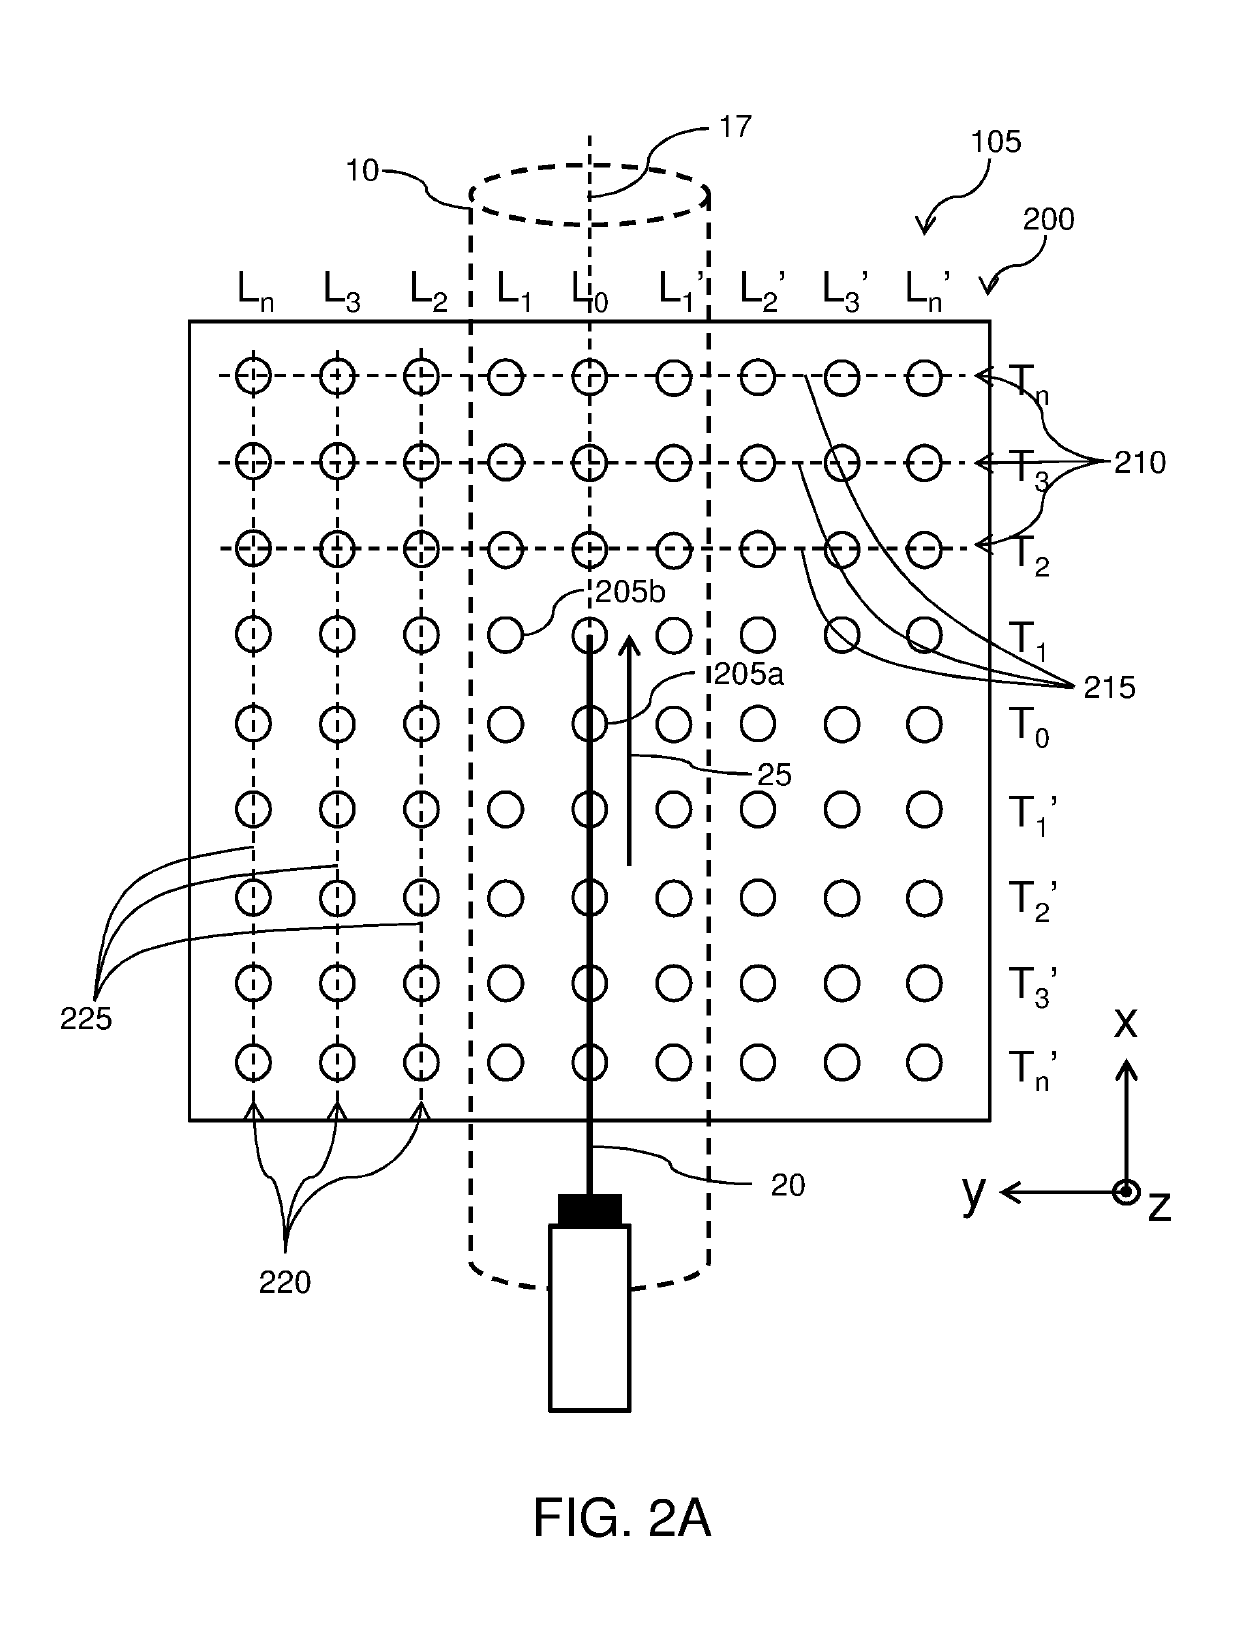 Needle tracking transducer array methods and apparatus